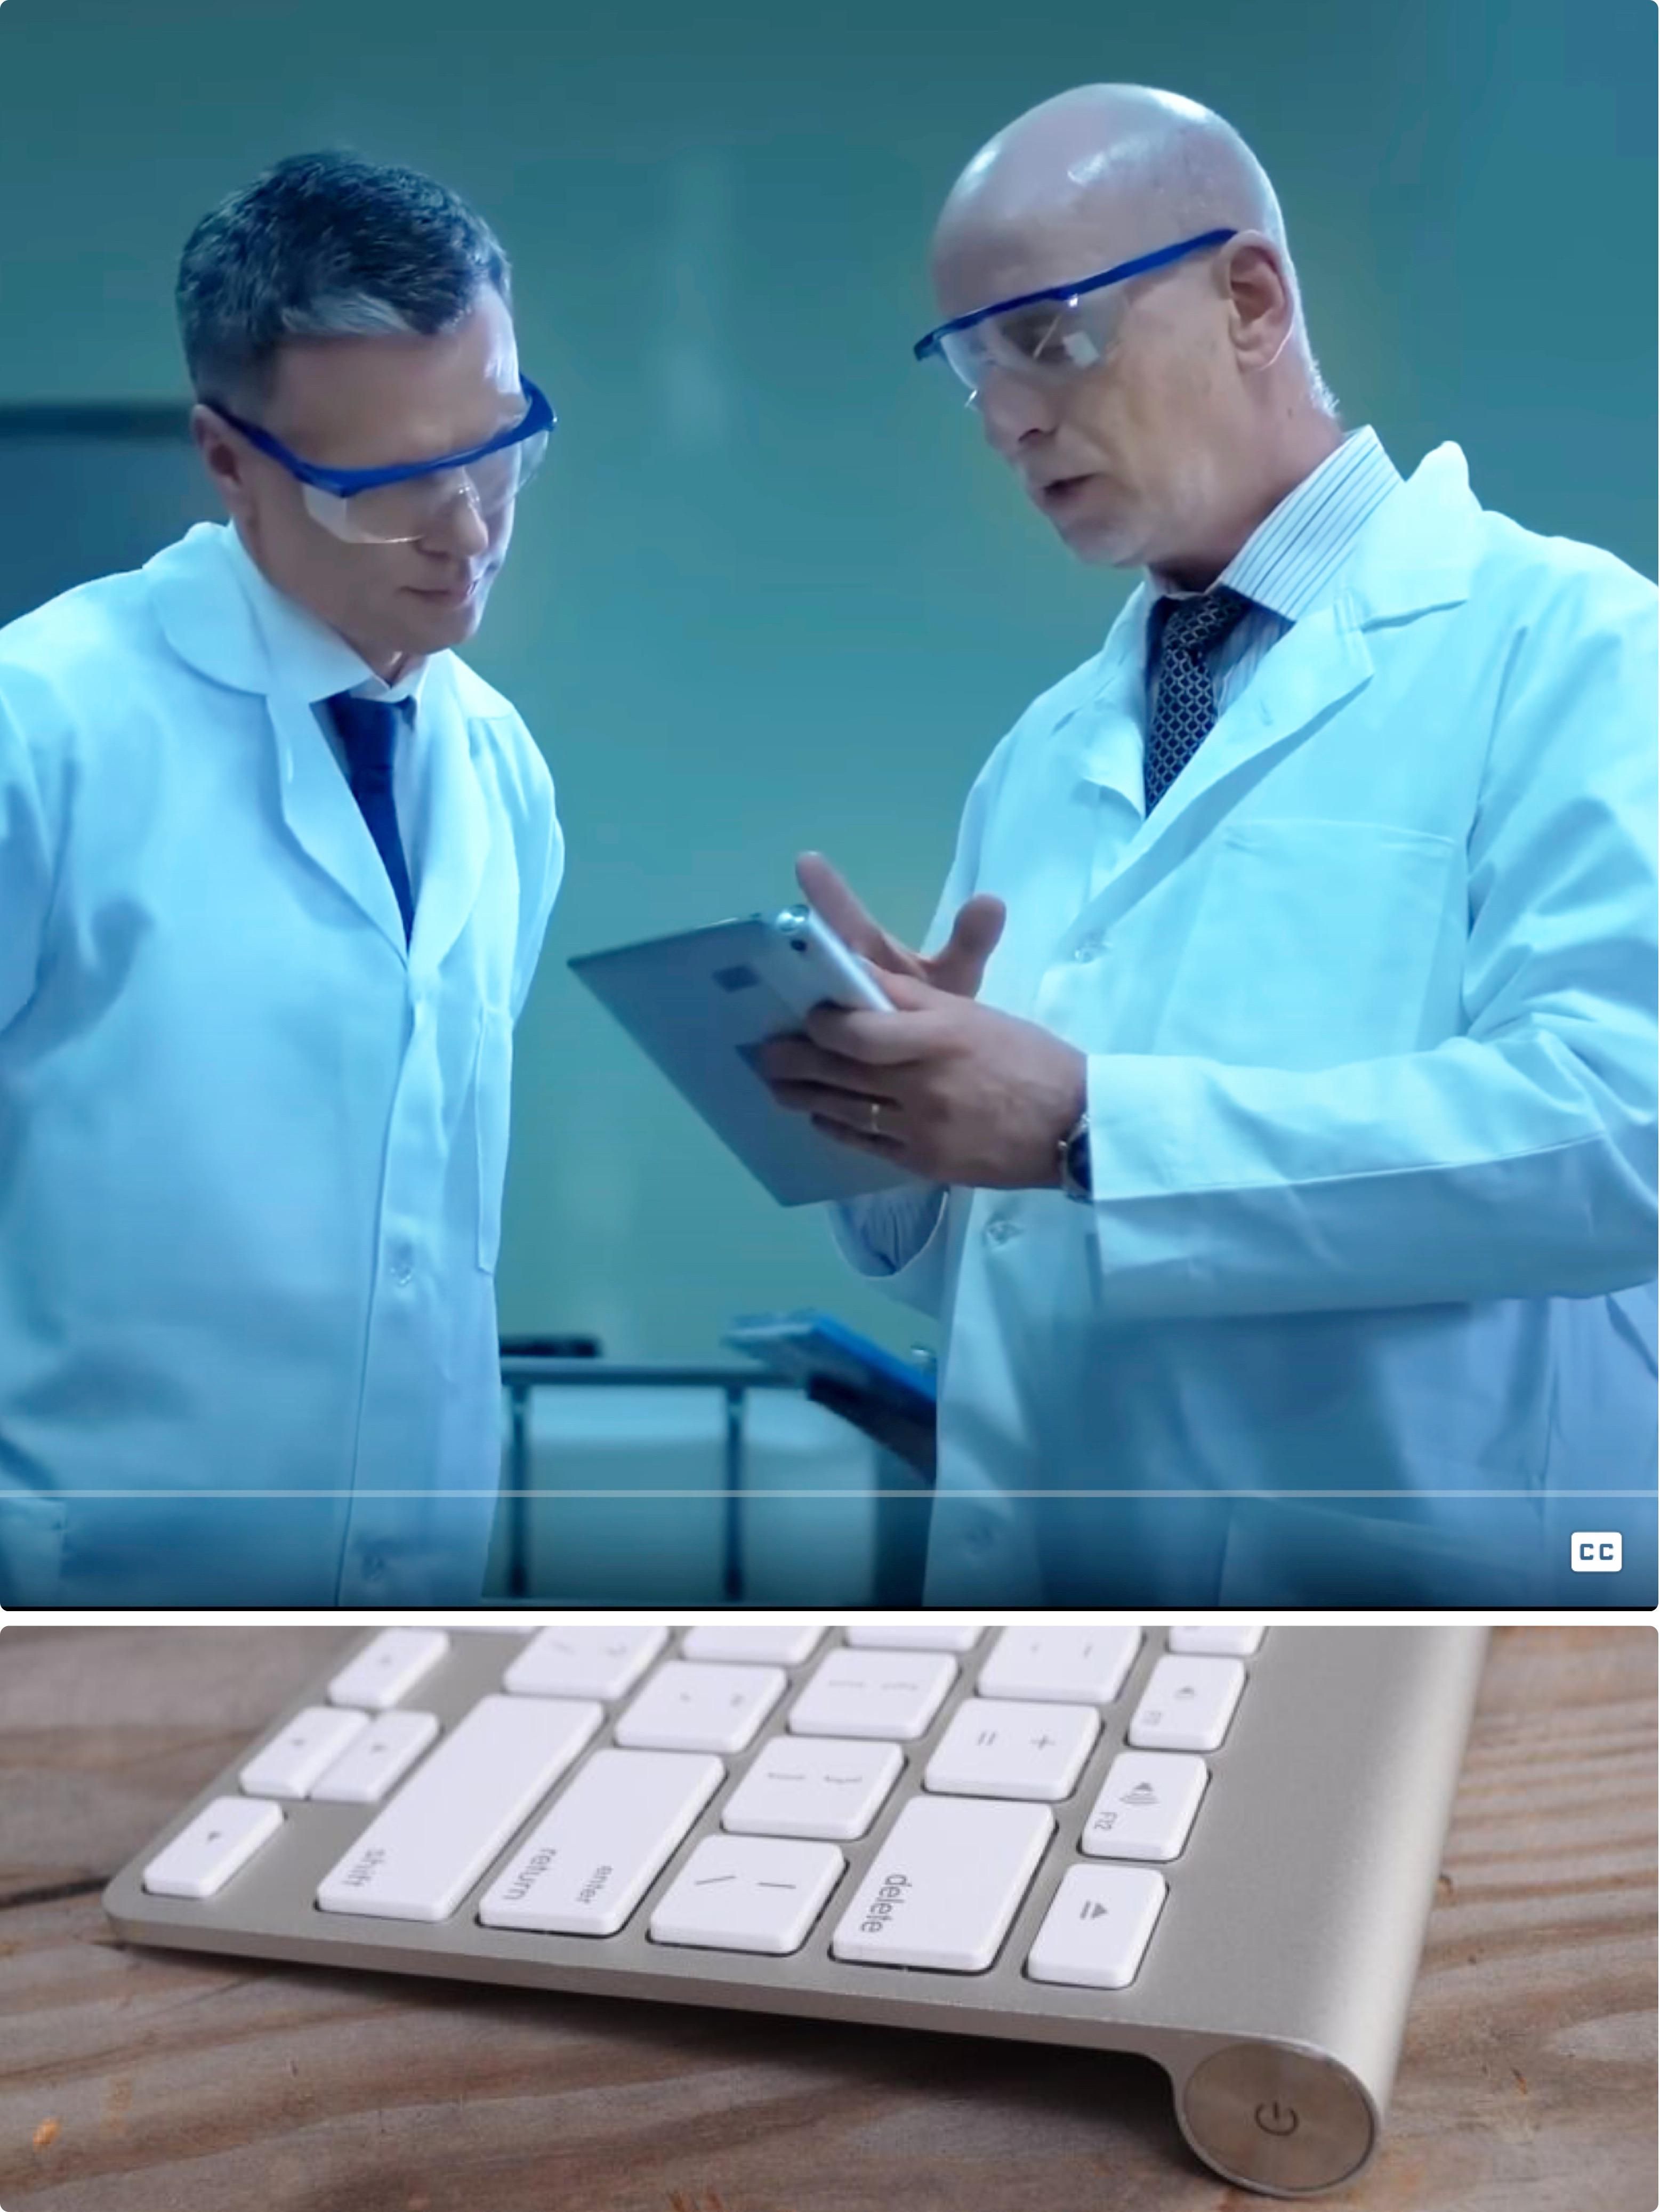 I'm like 80% sure the scientists in this stock footage are consulting a wireless keyboard turned sideways.